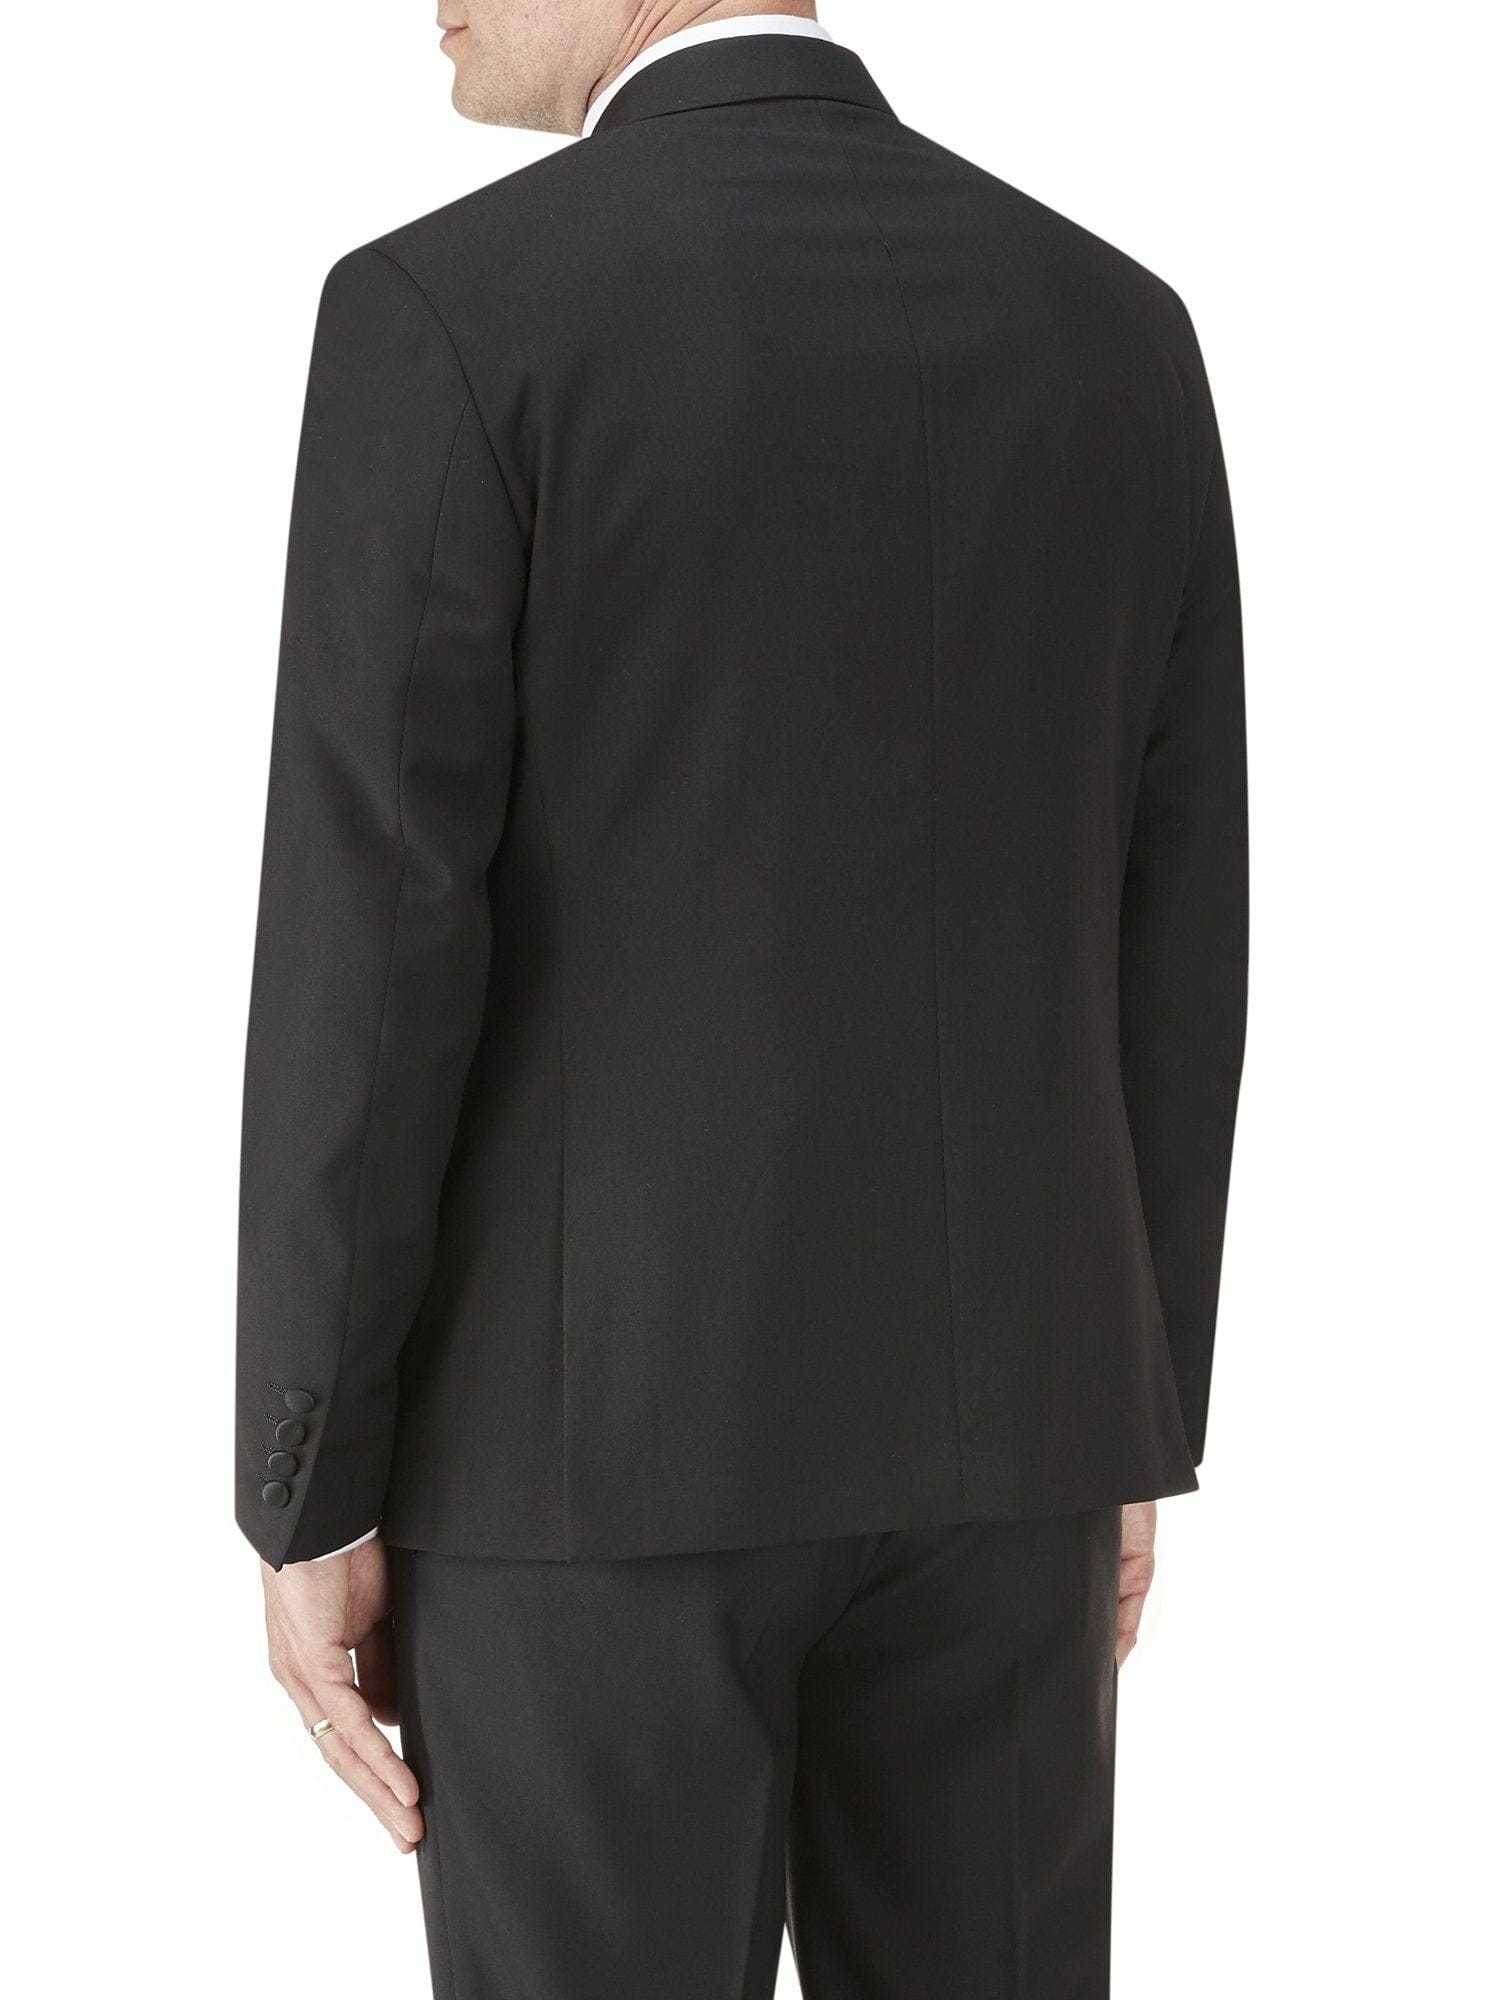 Sinatra Double Breasted Black Dinner Jacket - STOCK CLEARANCE - Blazers & Jackets Sale - 